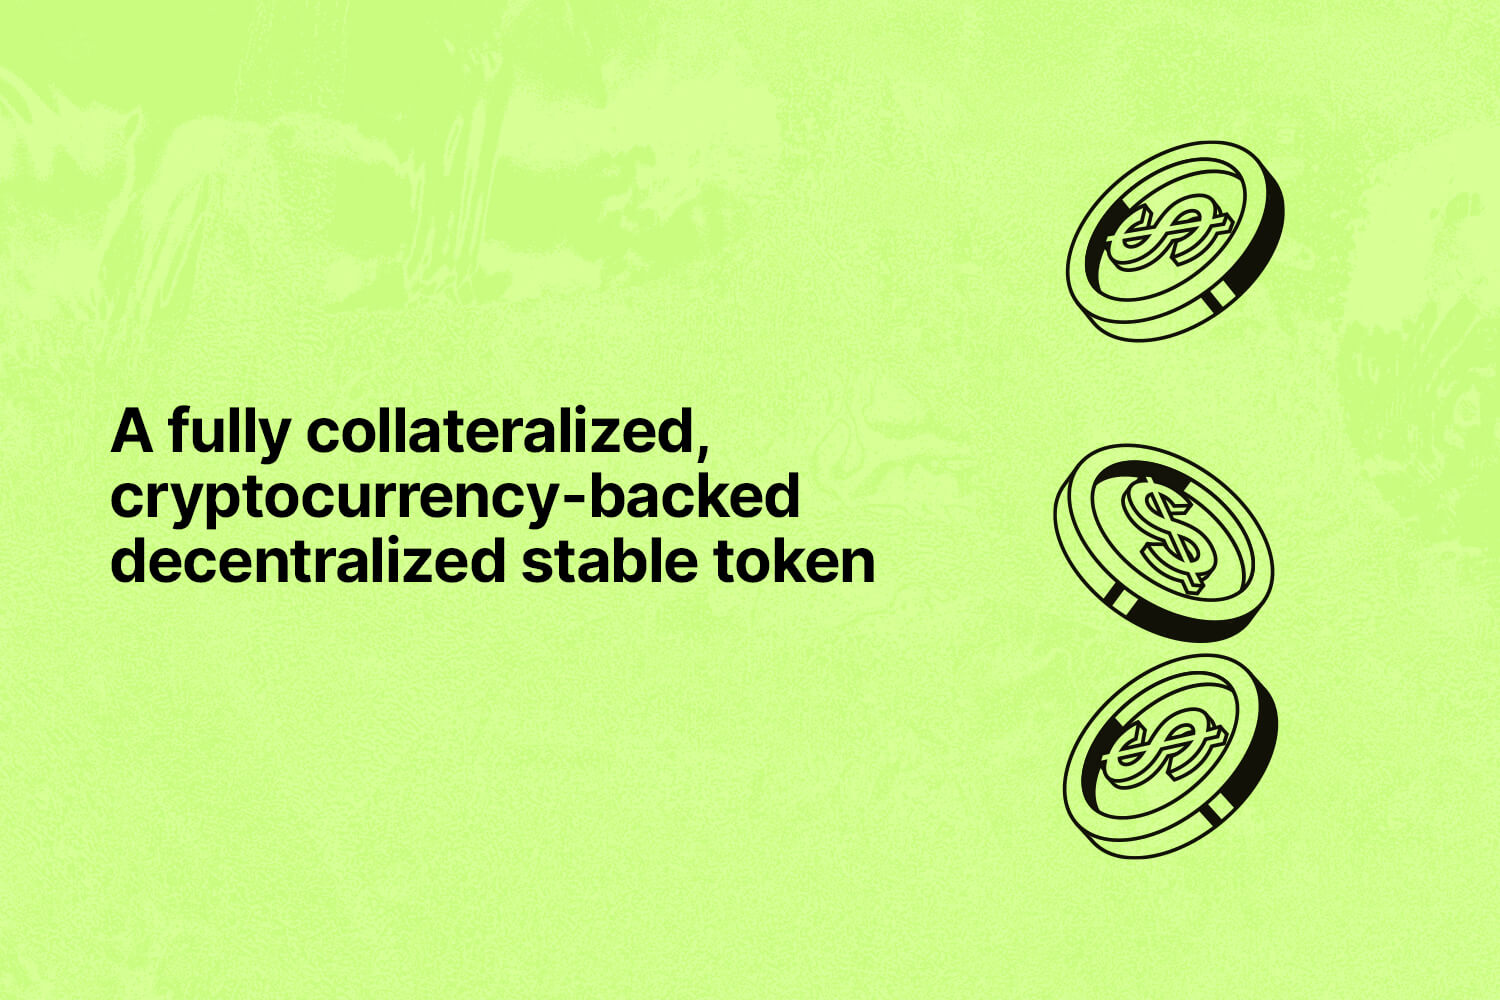 What Is Inter Stable Token (Ist)?